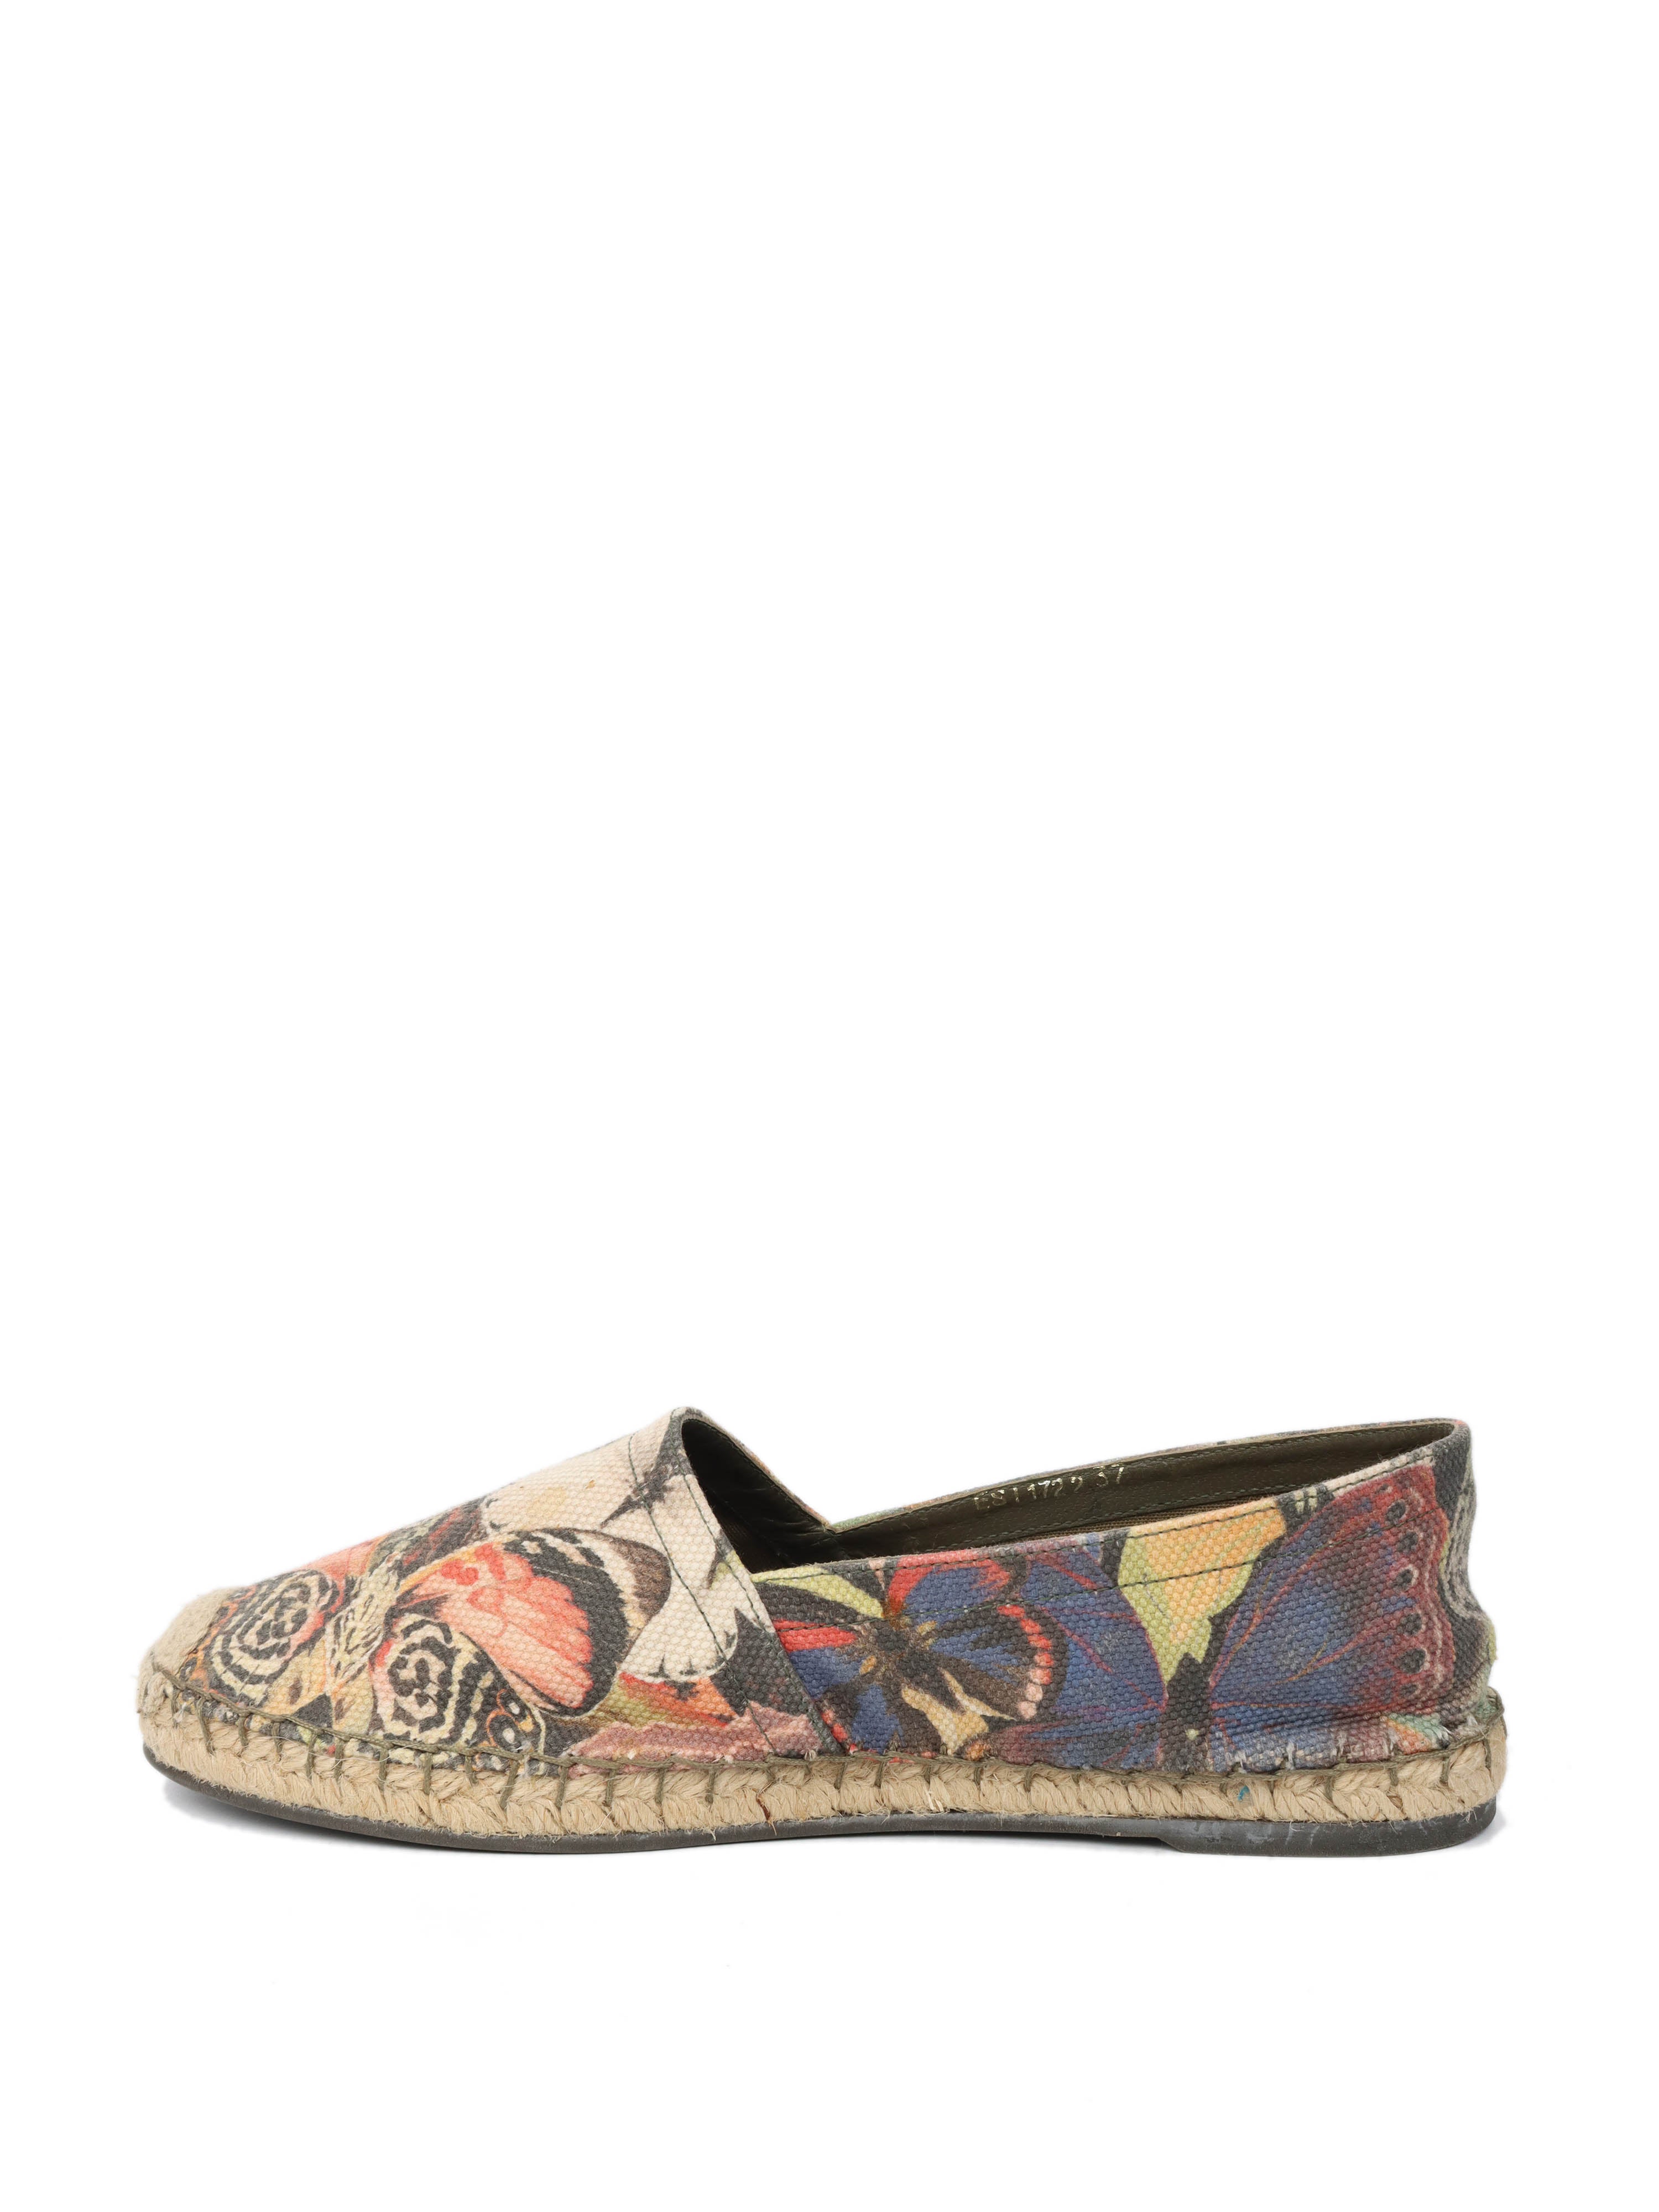 Valentino Butterfly Canvas Espadrilles 37